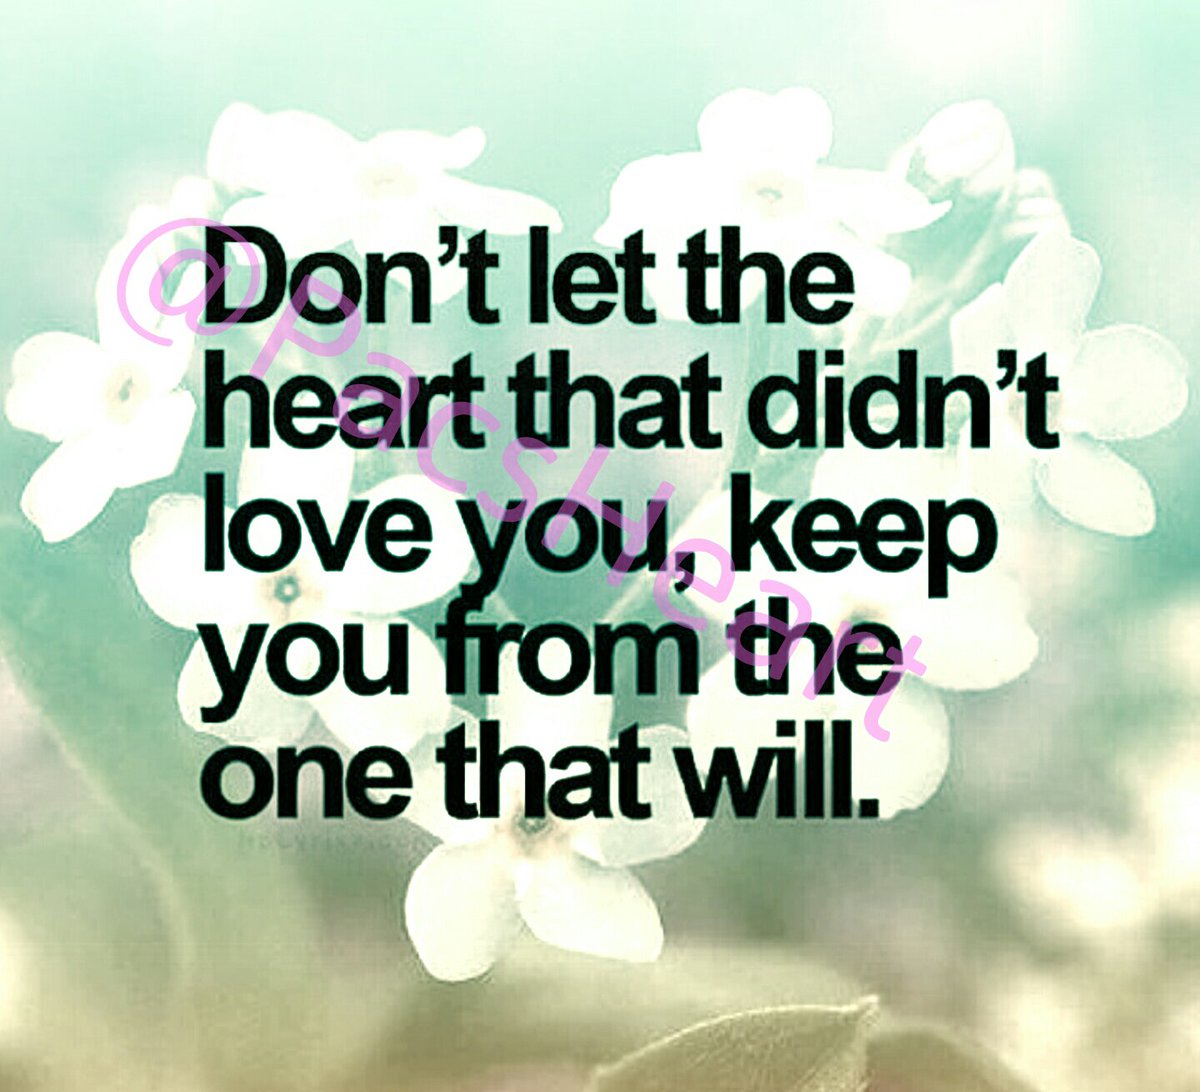 Don't let the heart that didn't love you, keep you from the one that will.
#LetGo #GoWhereYoureWanted
#love